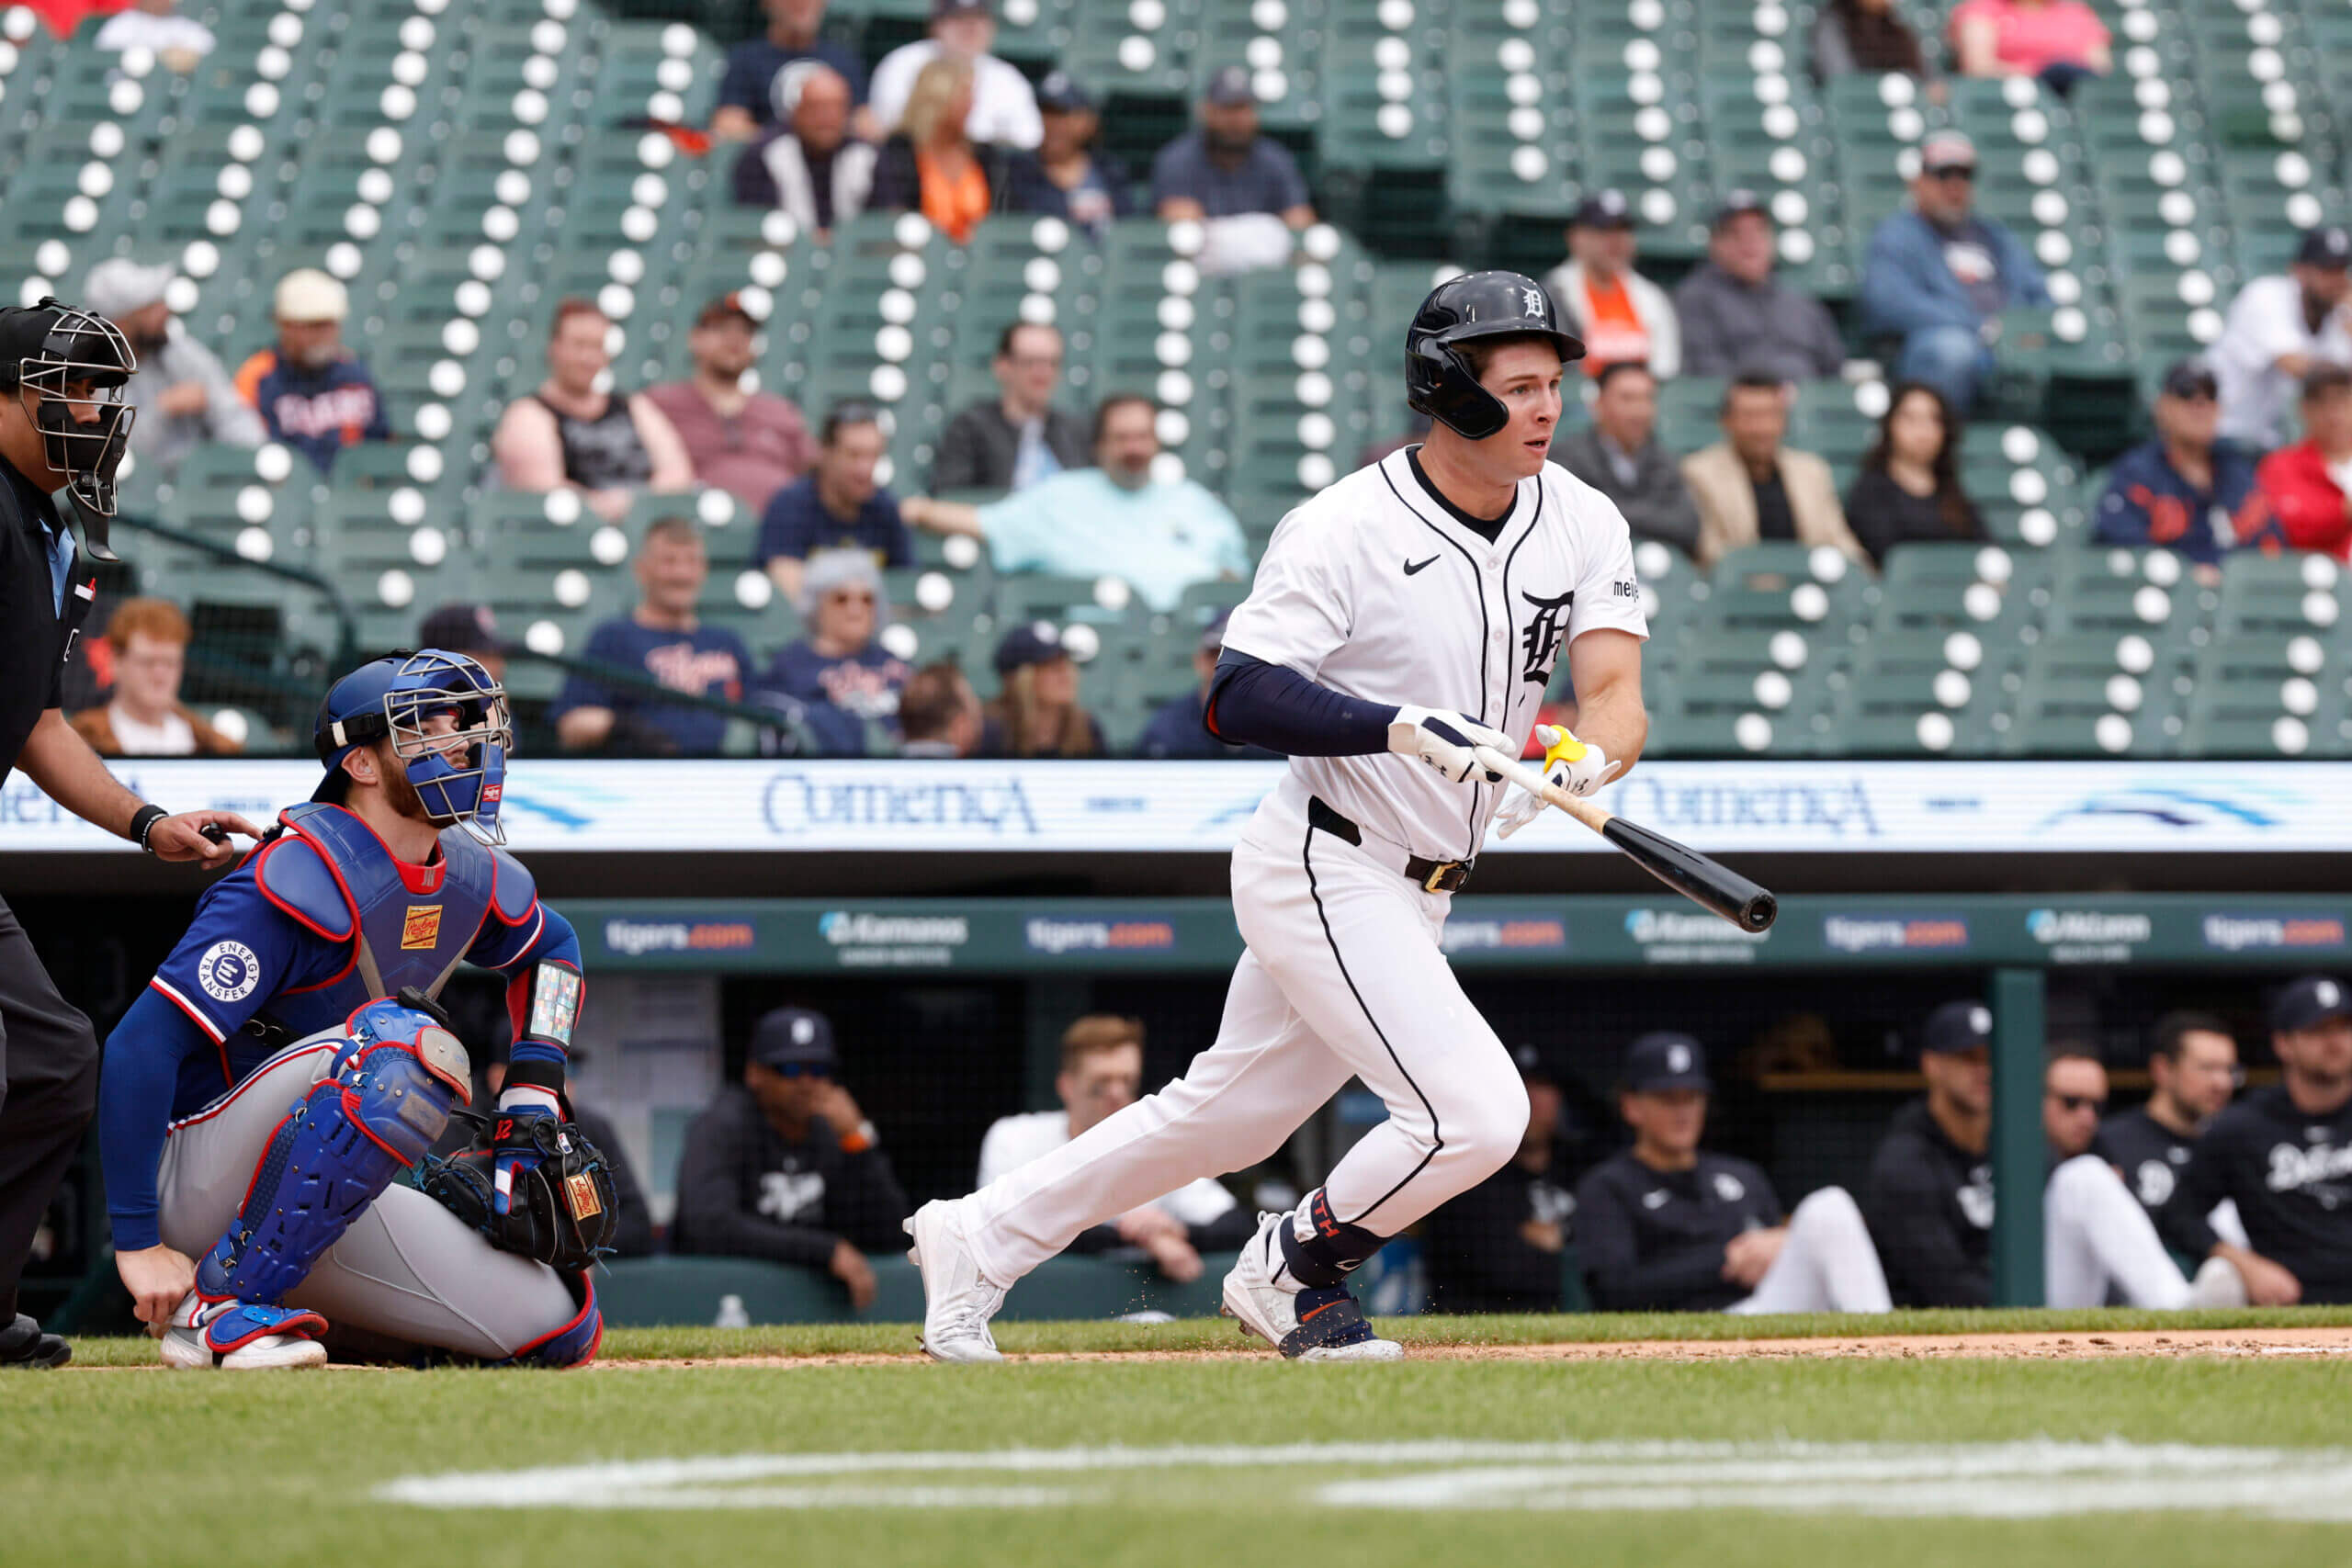 Shut out 19 innings, Tigers are learning how ugly the realities of a young lineup can get